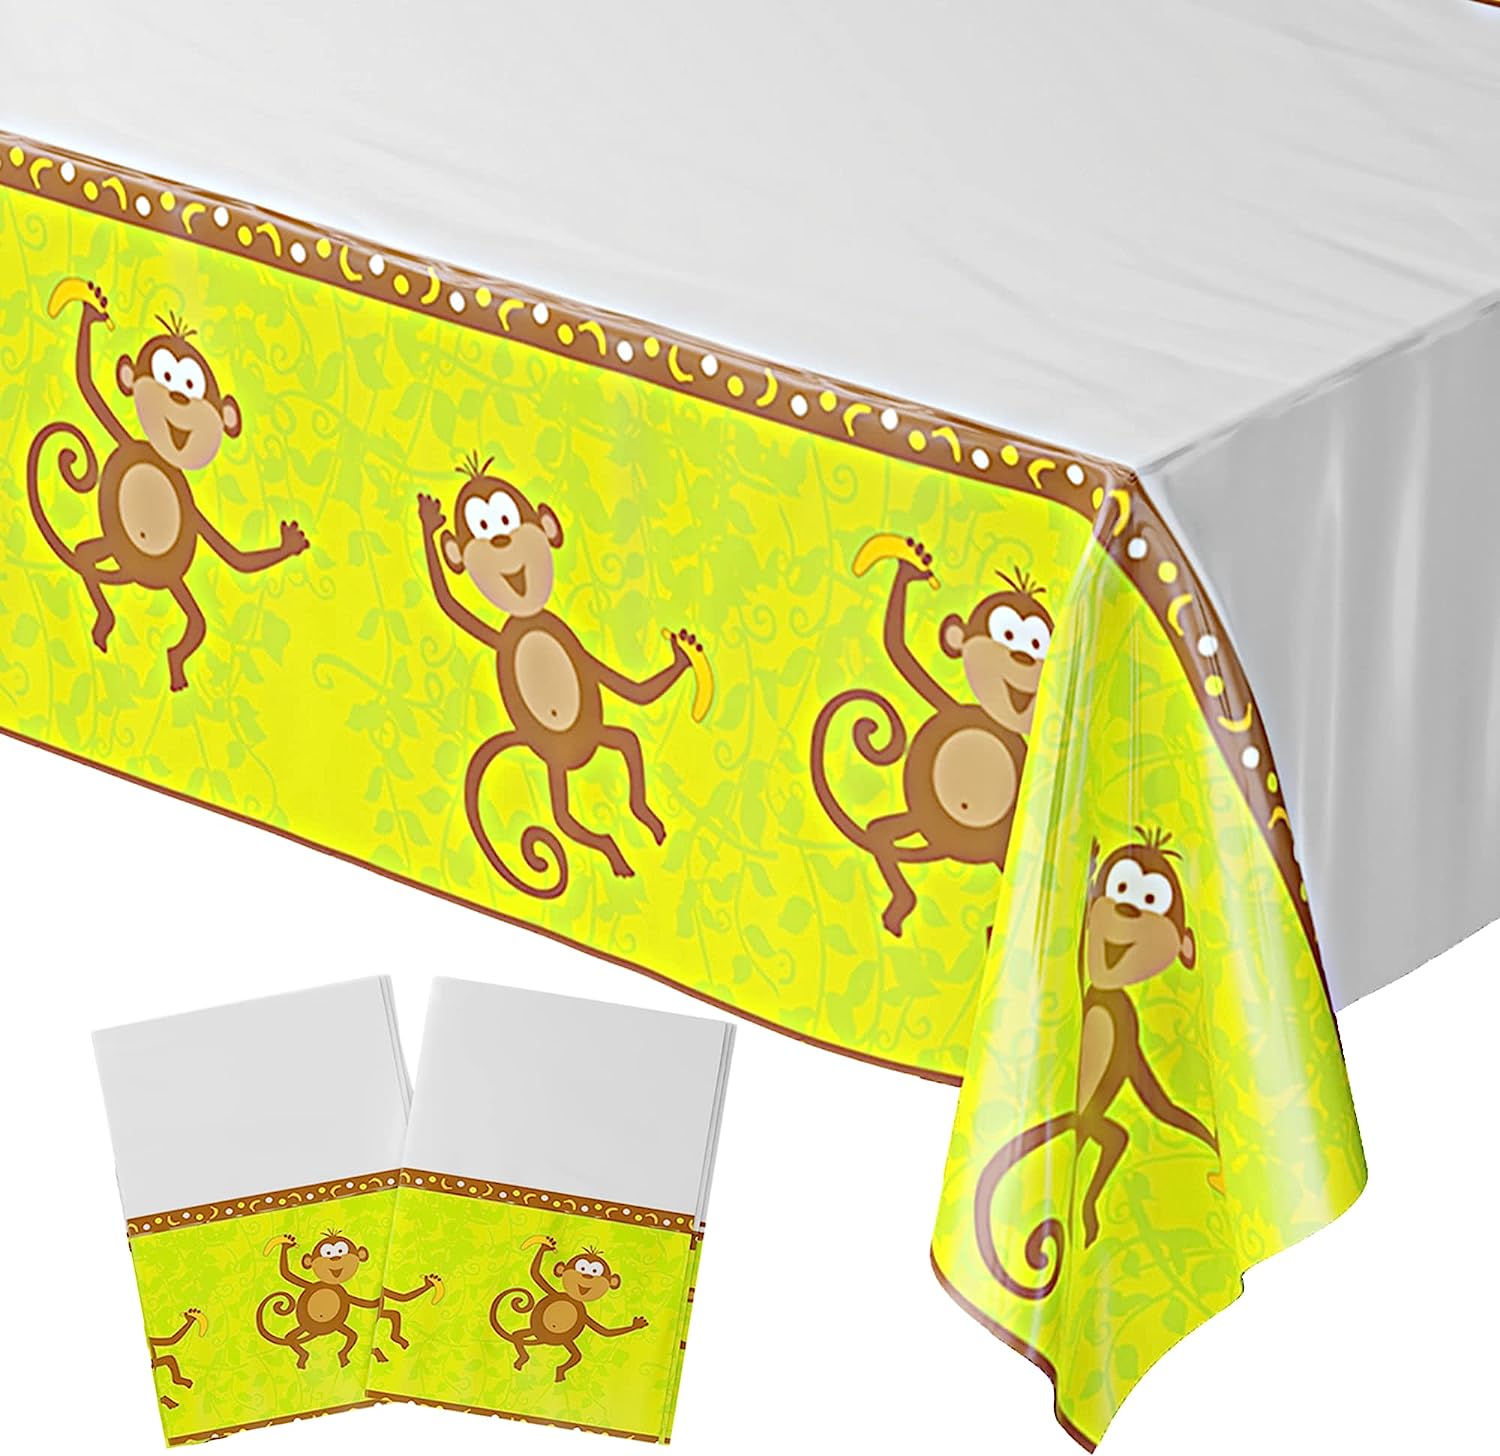 Image of a pack of two Monkey Party Table Covers measuring 54"x108" each, featuring a cute monkey design. These table covers are perfect for monkey-themed parties, jungle baby showers, or any other festive occasion. The covers are displayed on a plain background.